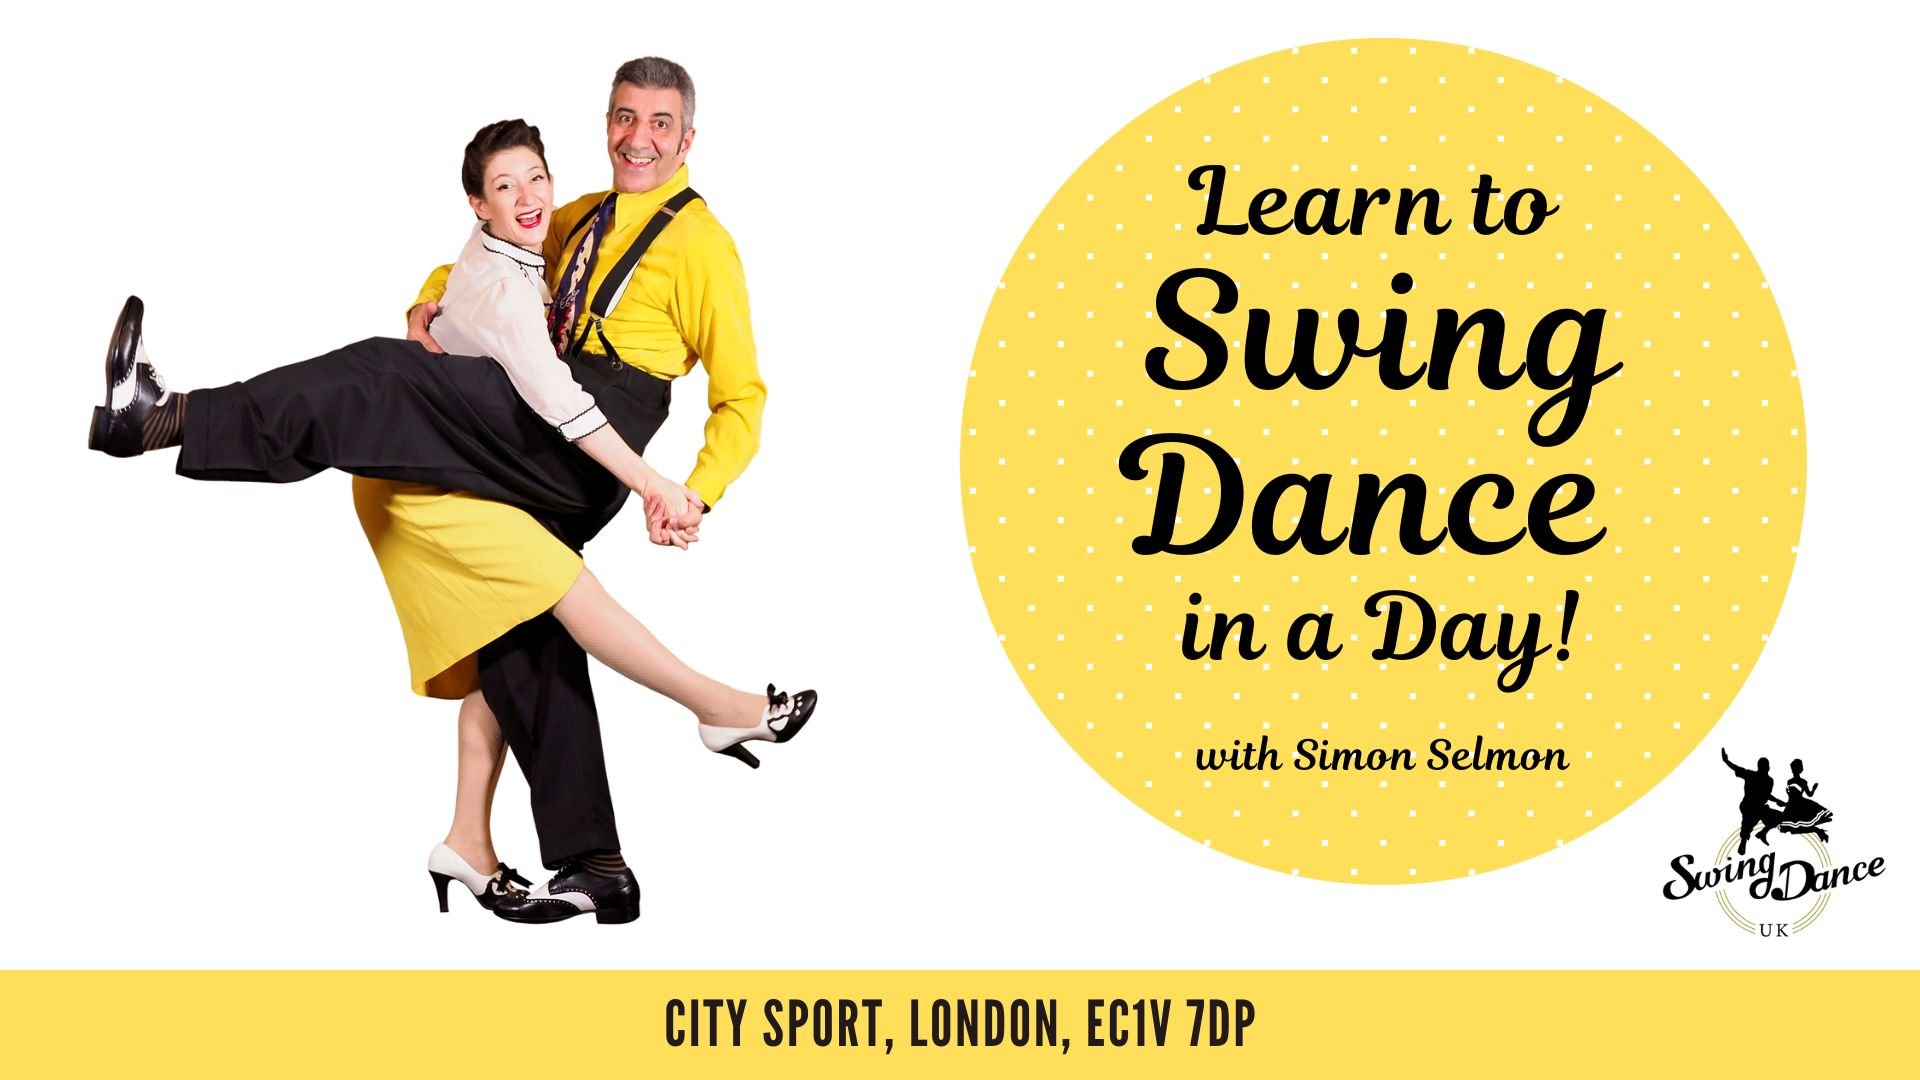 Learn to Swing Dance in a Day with Simon Selmon